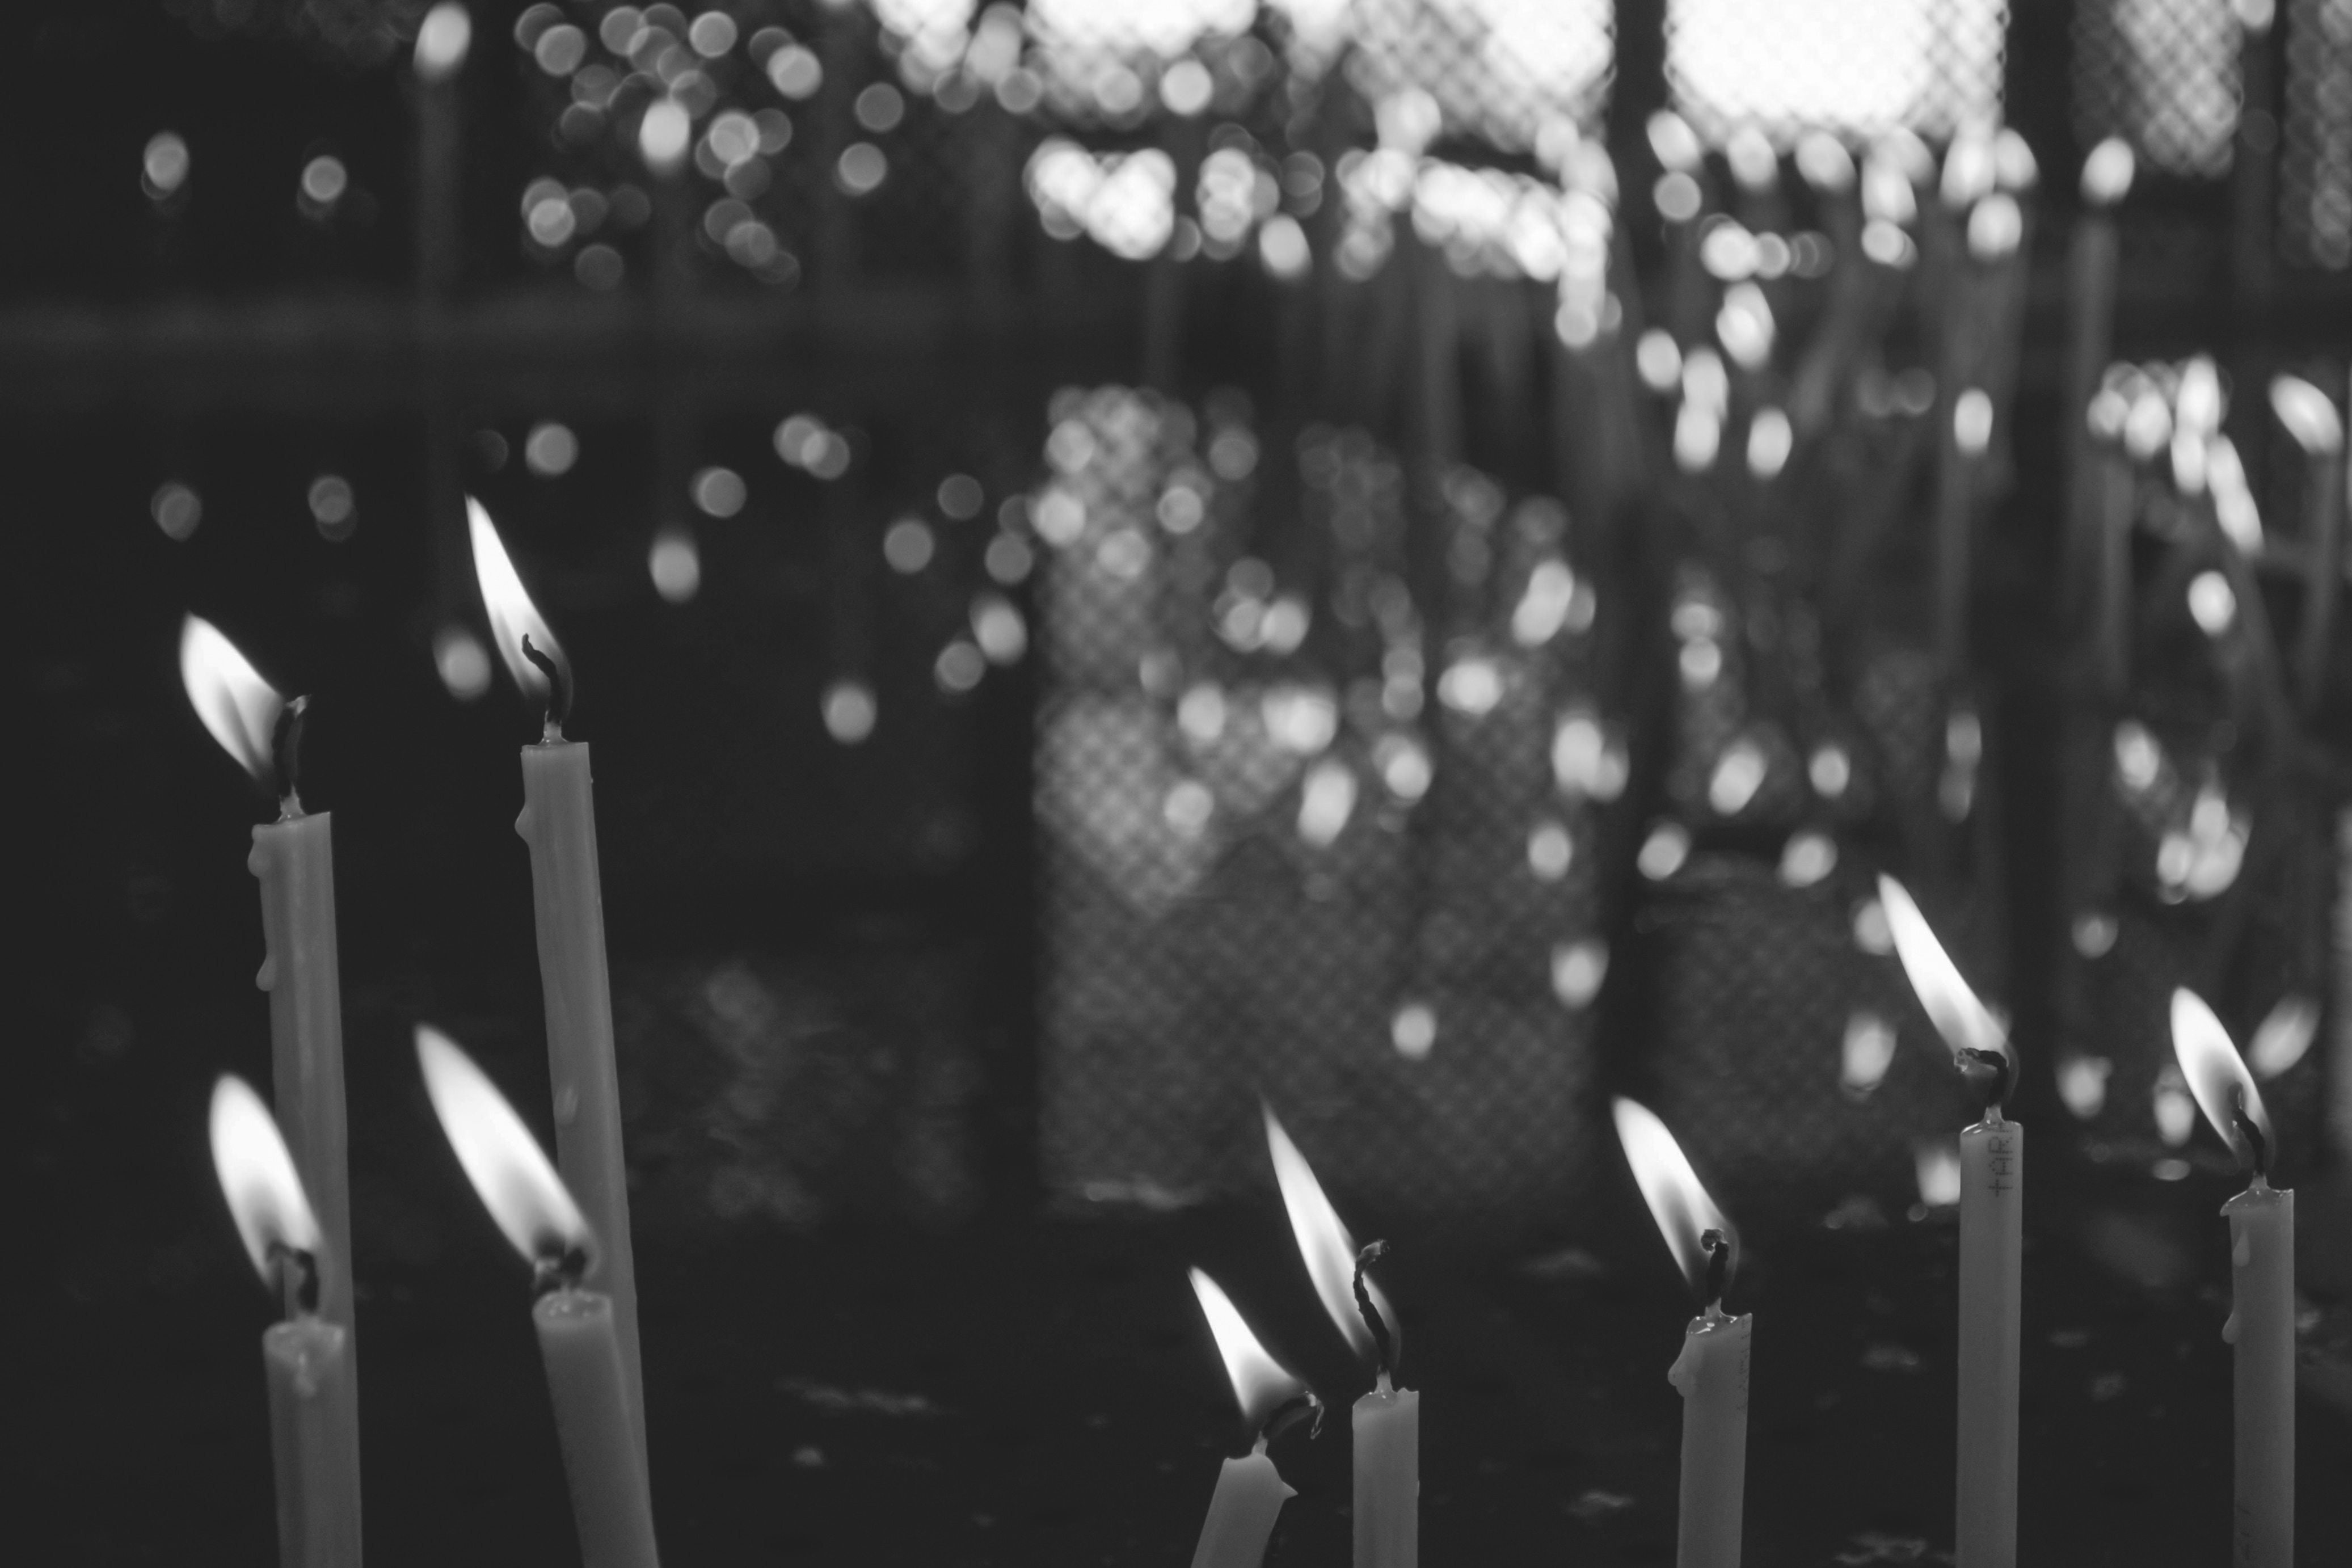 1024x768 wallpaper | gray scale photography of candles | Peakpx